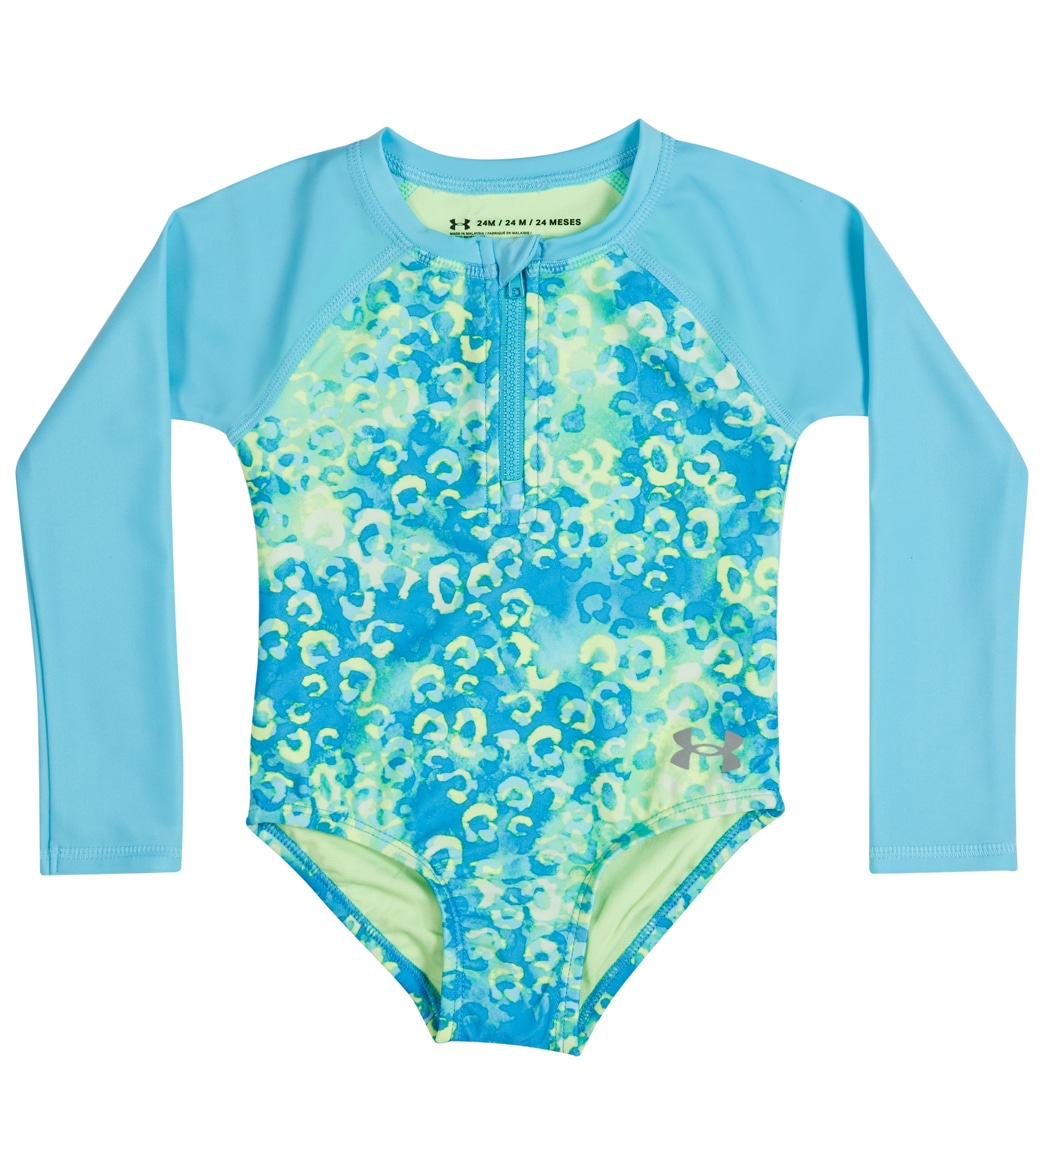 Under Armour Girls' Shadow Cheetah Paddlesuit Baby - Fresco Blue 12 Months - Swimoutlet.com